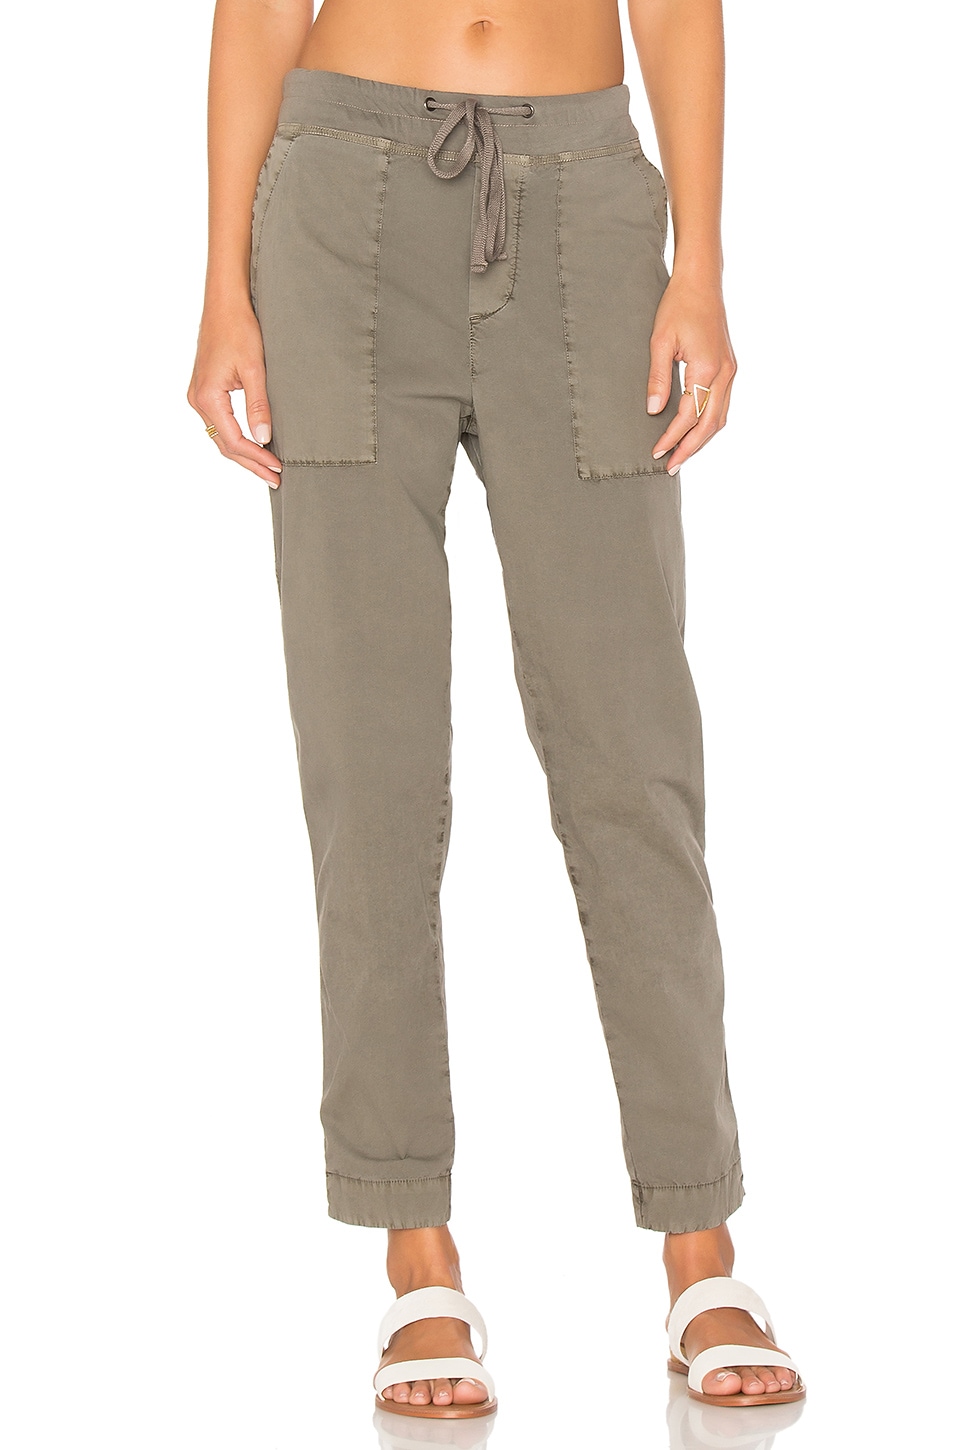 James Perse Tapered Pull On Pant in Ammo | REVOLVE